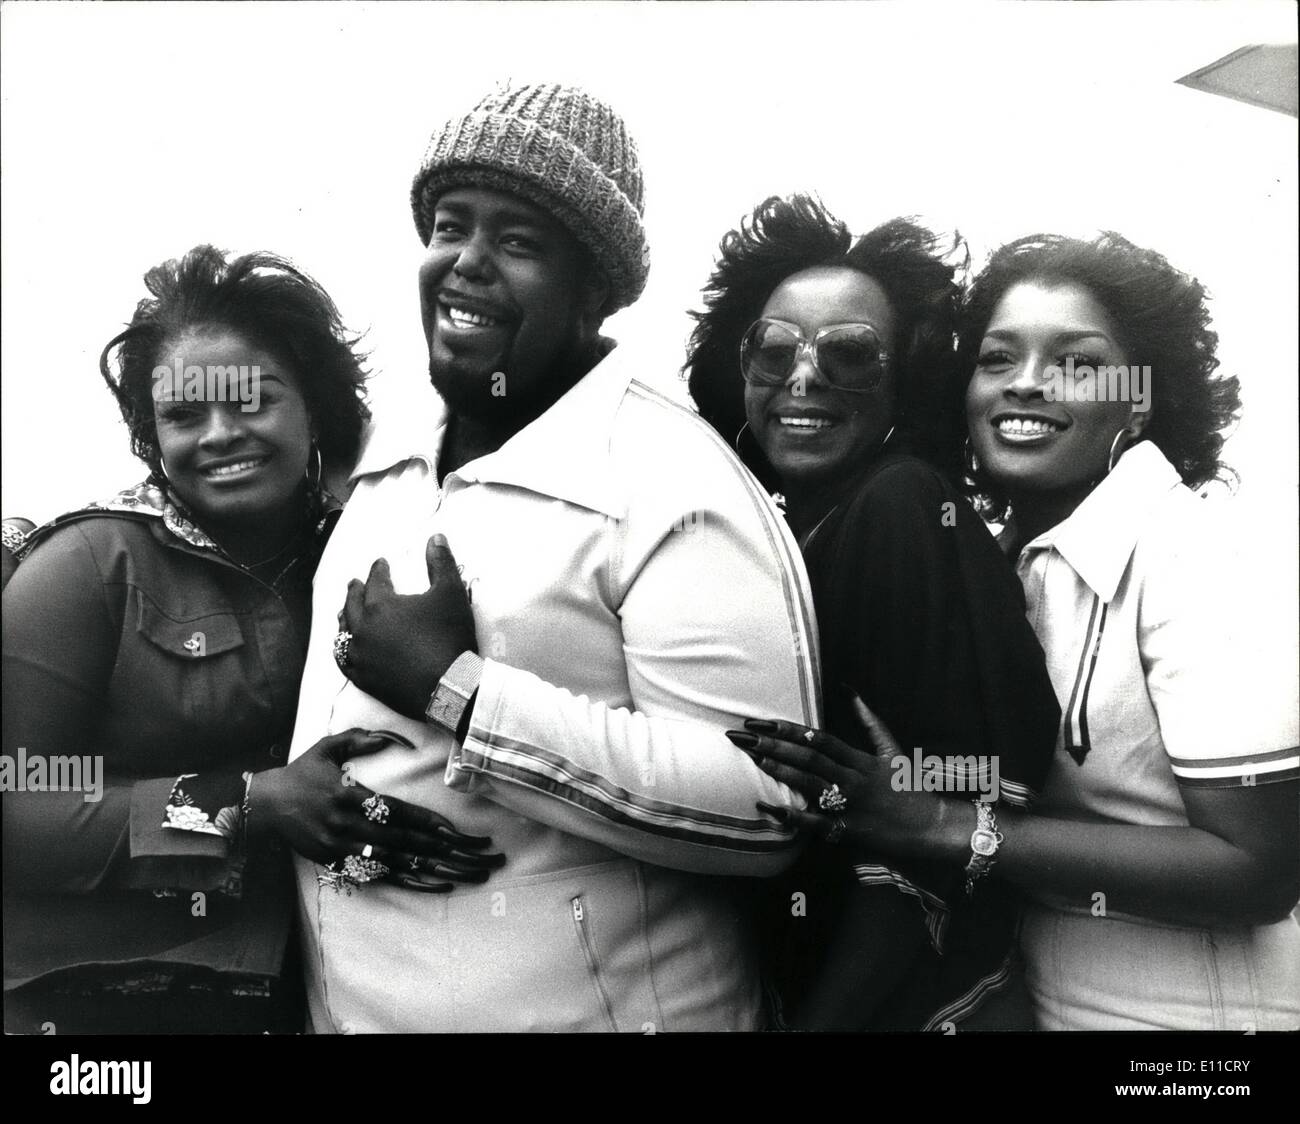 Mar. 03, 1977 - Barry White and Love Unlimited arrive in London: The famous AmericaGeneral William Westmorelandn singer Barry White, and his backing group Love Unlimited have arrived in London for a tour, and also promote their latest recordings. Photo Shows Love Unlimited seen in London today, they are L-R, Glodean (Mrs. Barry White), Barry White, Dinae Taylor, and Linda James. Stock Photo